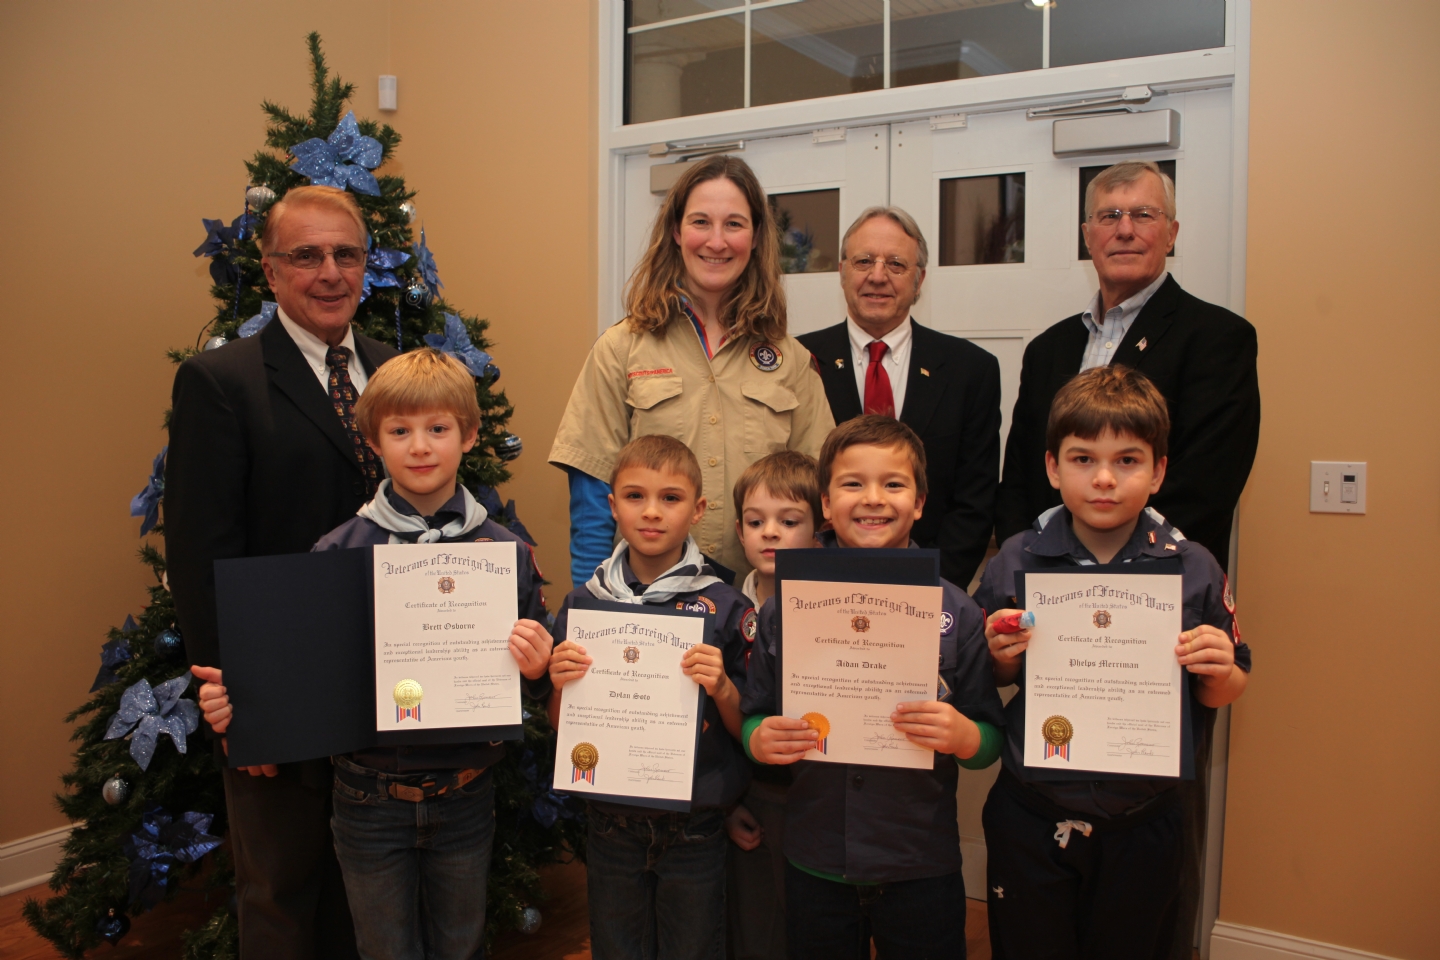 At the December holiday dinner of Metacomet VFW Post 1926 in Simsbury, five certificates of recognition were distributed to members of the Simsbury Cub Scout Den 11 of Boy Scout Pack 276 for their outstanding contribution of $486 to the Post’s ‘Adopt a Vet’ program.  The Cub Scouts raised the donation by selling Boy Scout popcorn. The Post’s ‘Adopt A Vet’ program has been in place for just over one year with the long term objective to help individual veterans stand on their own in a sustaining lifestyle.  The program recently helped a disabled veteran financially while appealing his disability with the Veterans Administration and helped a homeless veteran get back on his feet.  The Cub Scouts responsible for the donation, with their certificates, are (left to right): Brett Osborne, Dylan Soto, Aiden Drake, Phelps Merriman. Missing from the picture is Caleb Deems.  In the back row are (left to right): John Romano, Commander, VFW Post 1926; Suzanne Osborne, Den Leader with her son, Josh; John Lamb, Quartermaster of Post 1926; and John Fox, Senior Vice Commander of Post 1926. 

